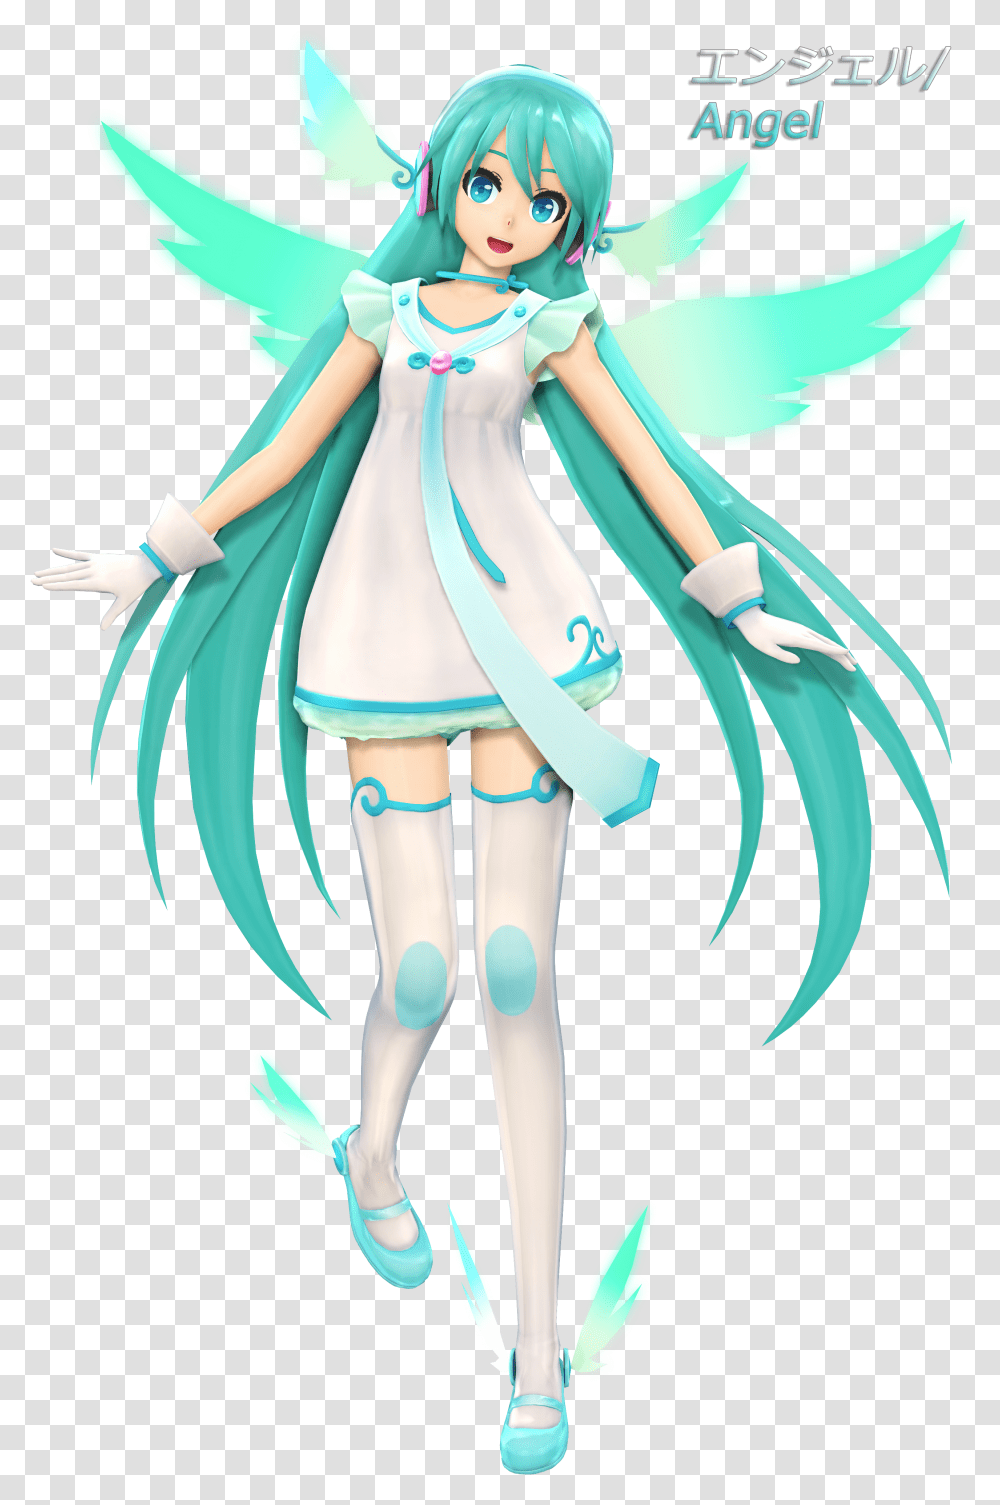 Anime Angel Hatsune Miku Angel Outfit Transparent Png